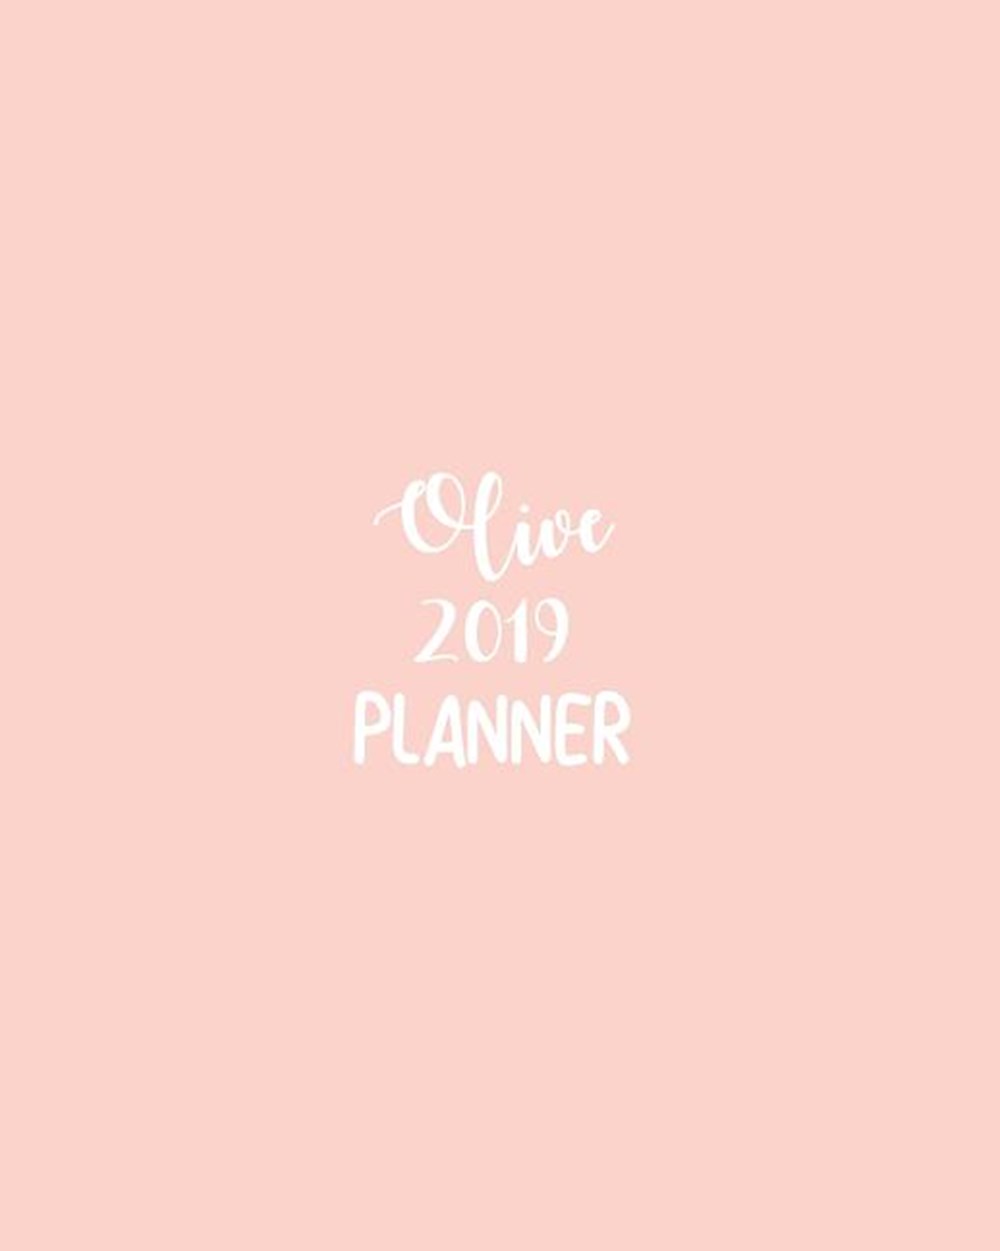 Olive 2019 Planner Calendar with Daily Task Checklist, Organizer, Journal Notebook and Initial Name 